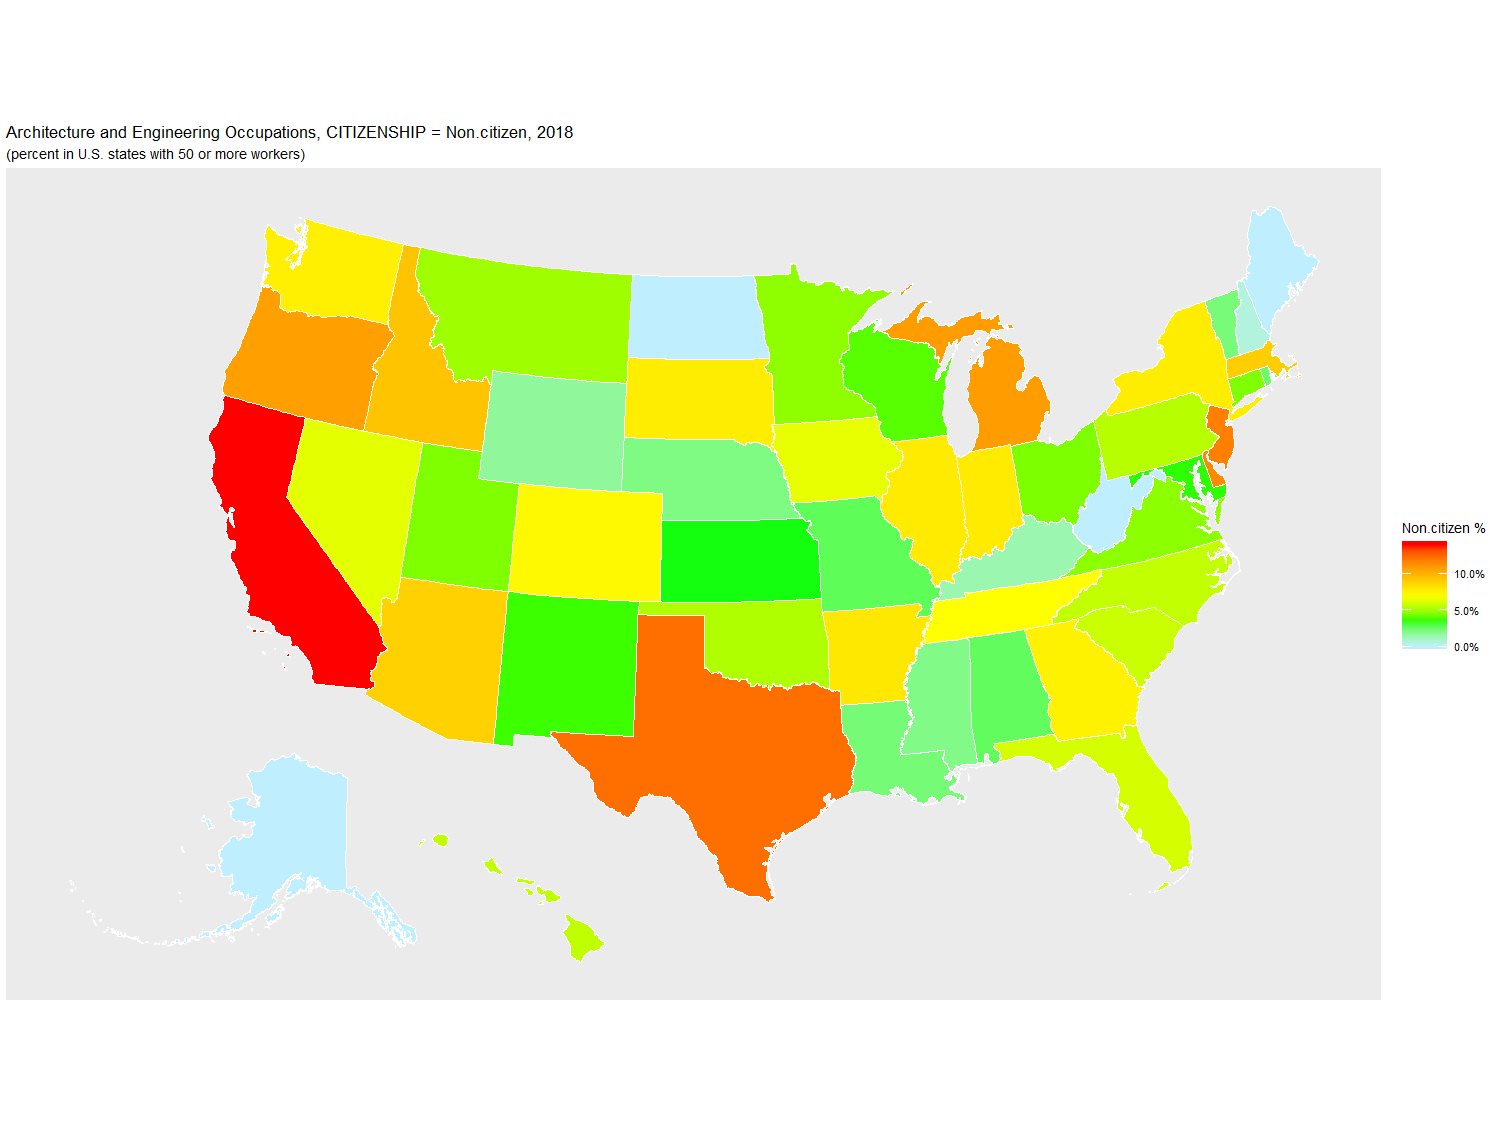 Non-citizen Percentage of Architecture and Engineering Occupations by U.S. State, 2018